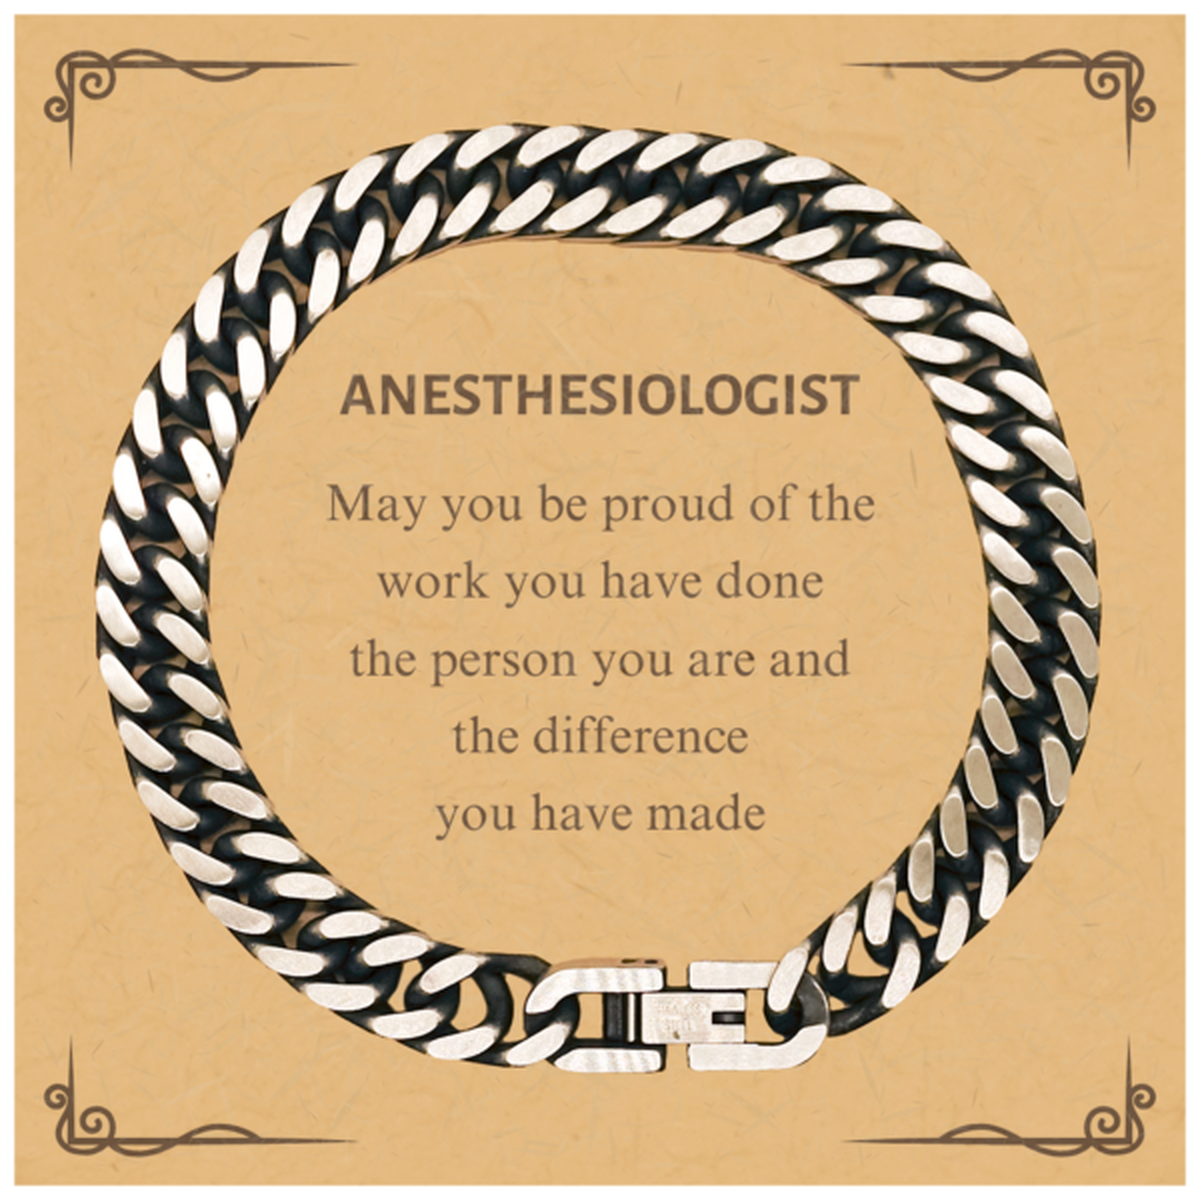 Anesthesiologist May you be proud of the work you have done, Retirement Anesthesiologist Cuban Link Chain Bracelet for Colleague Appreciation Gifts Amazing for Anesthesiologist